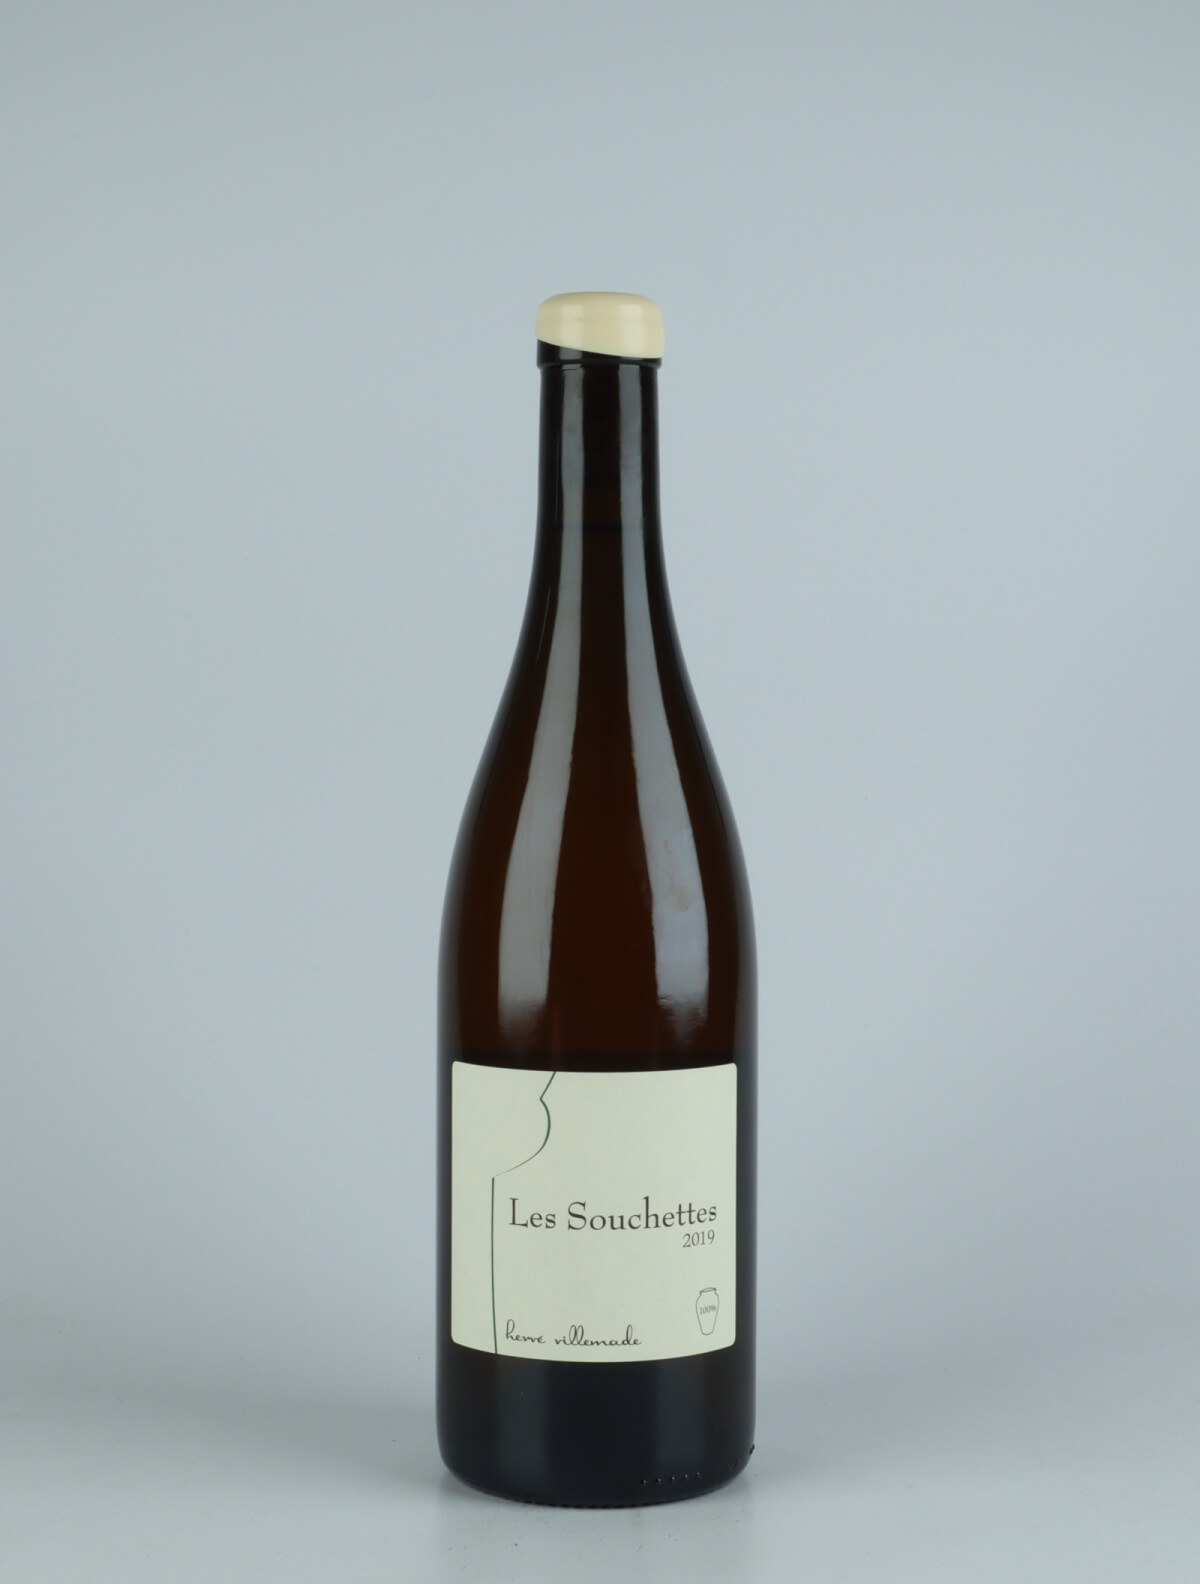 A bottle 2019 Les Souchettes White wine from Hervé Villemade, Loire in France